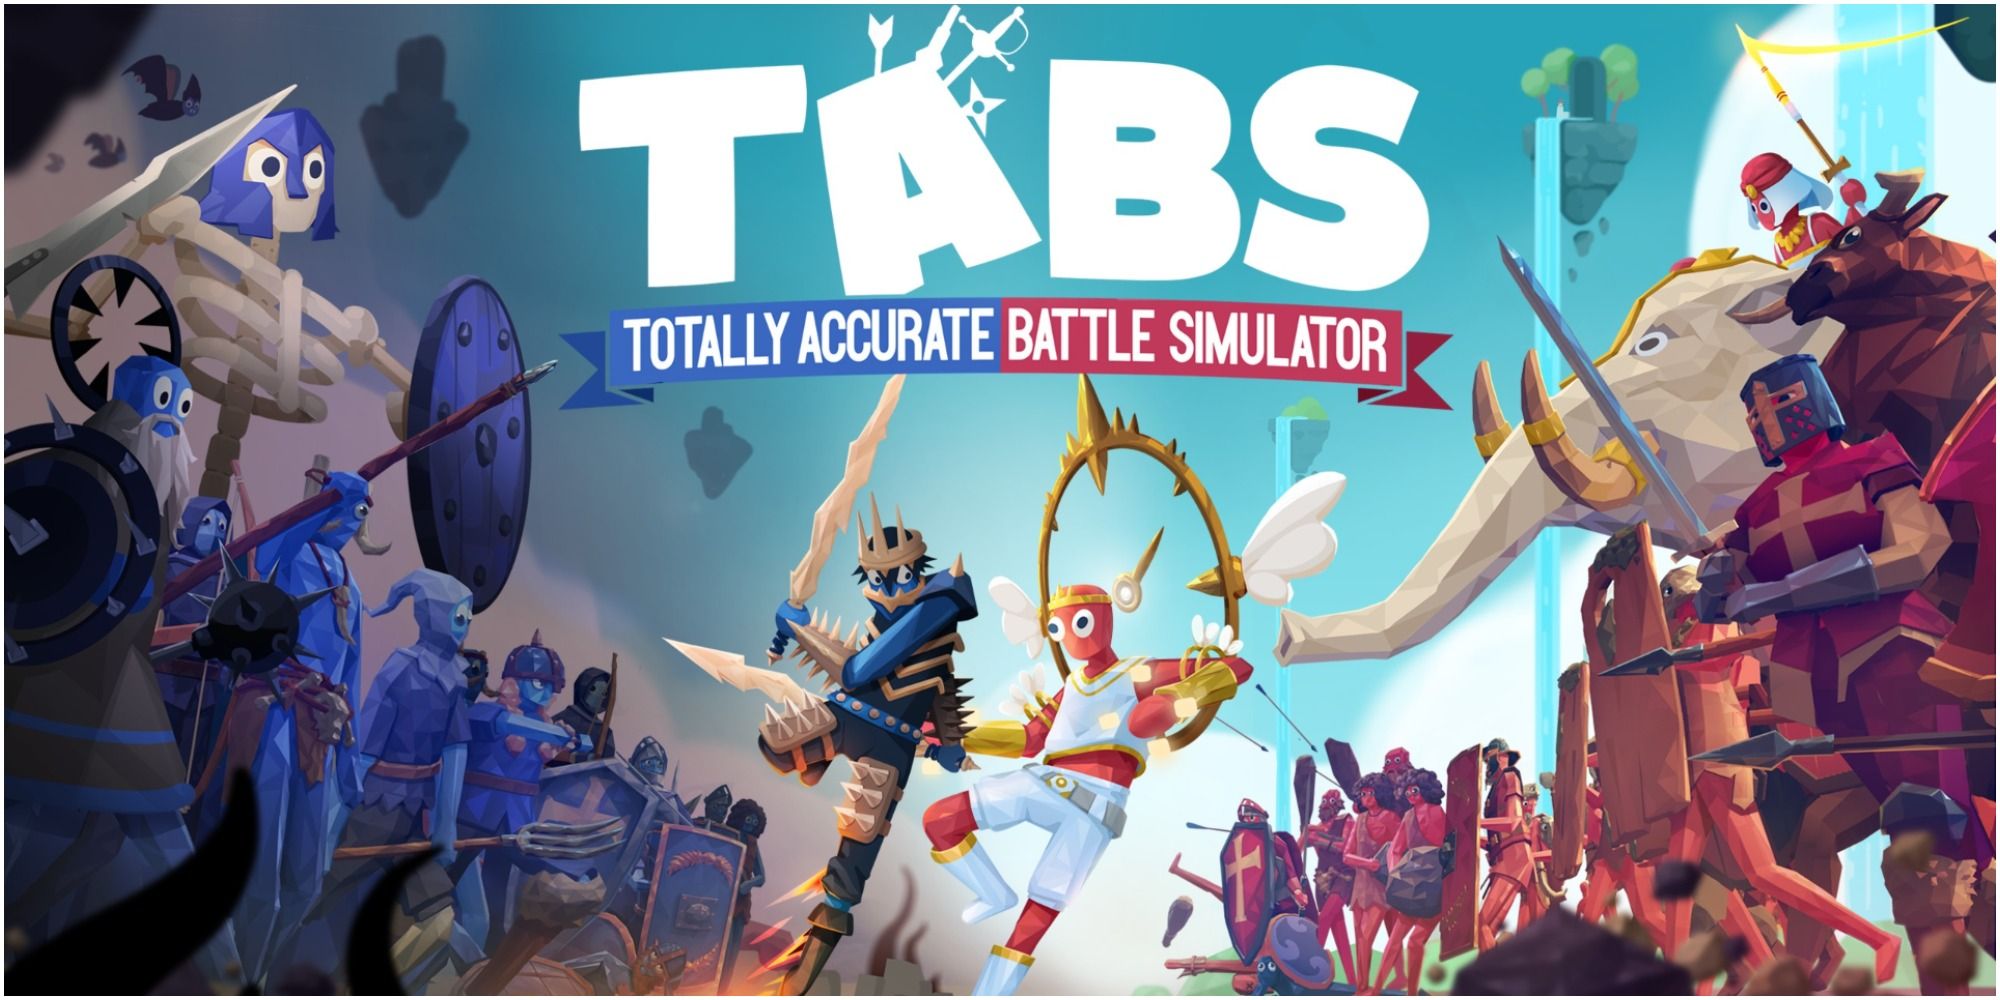 A red and blue army collide in a promotional image for Totally Accurate Battle Simulator